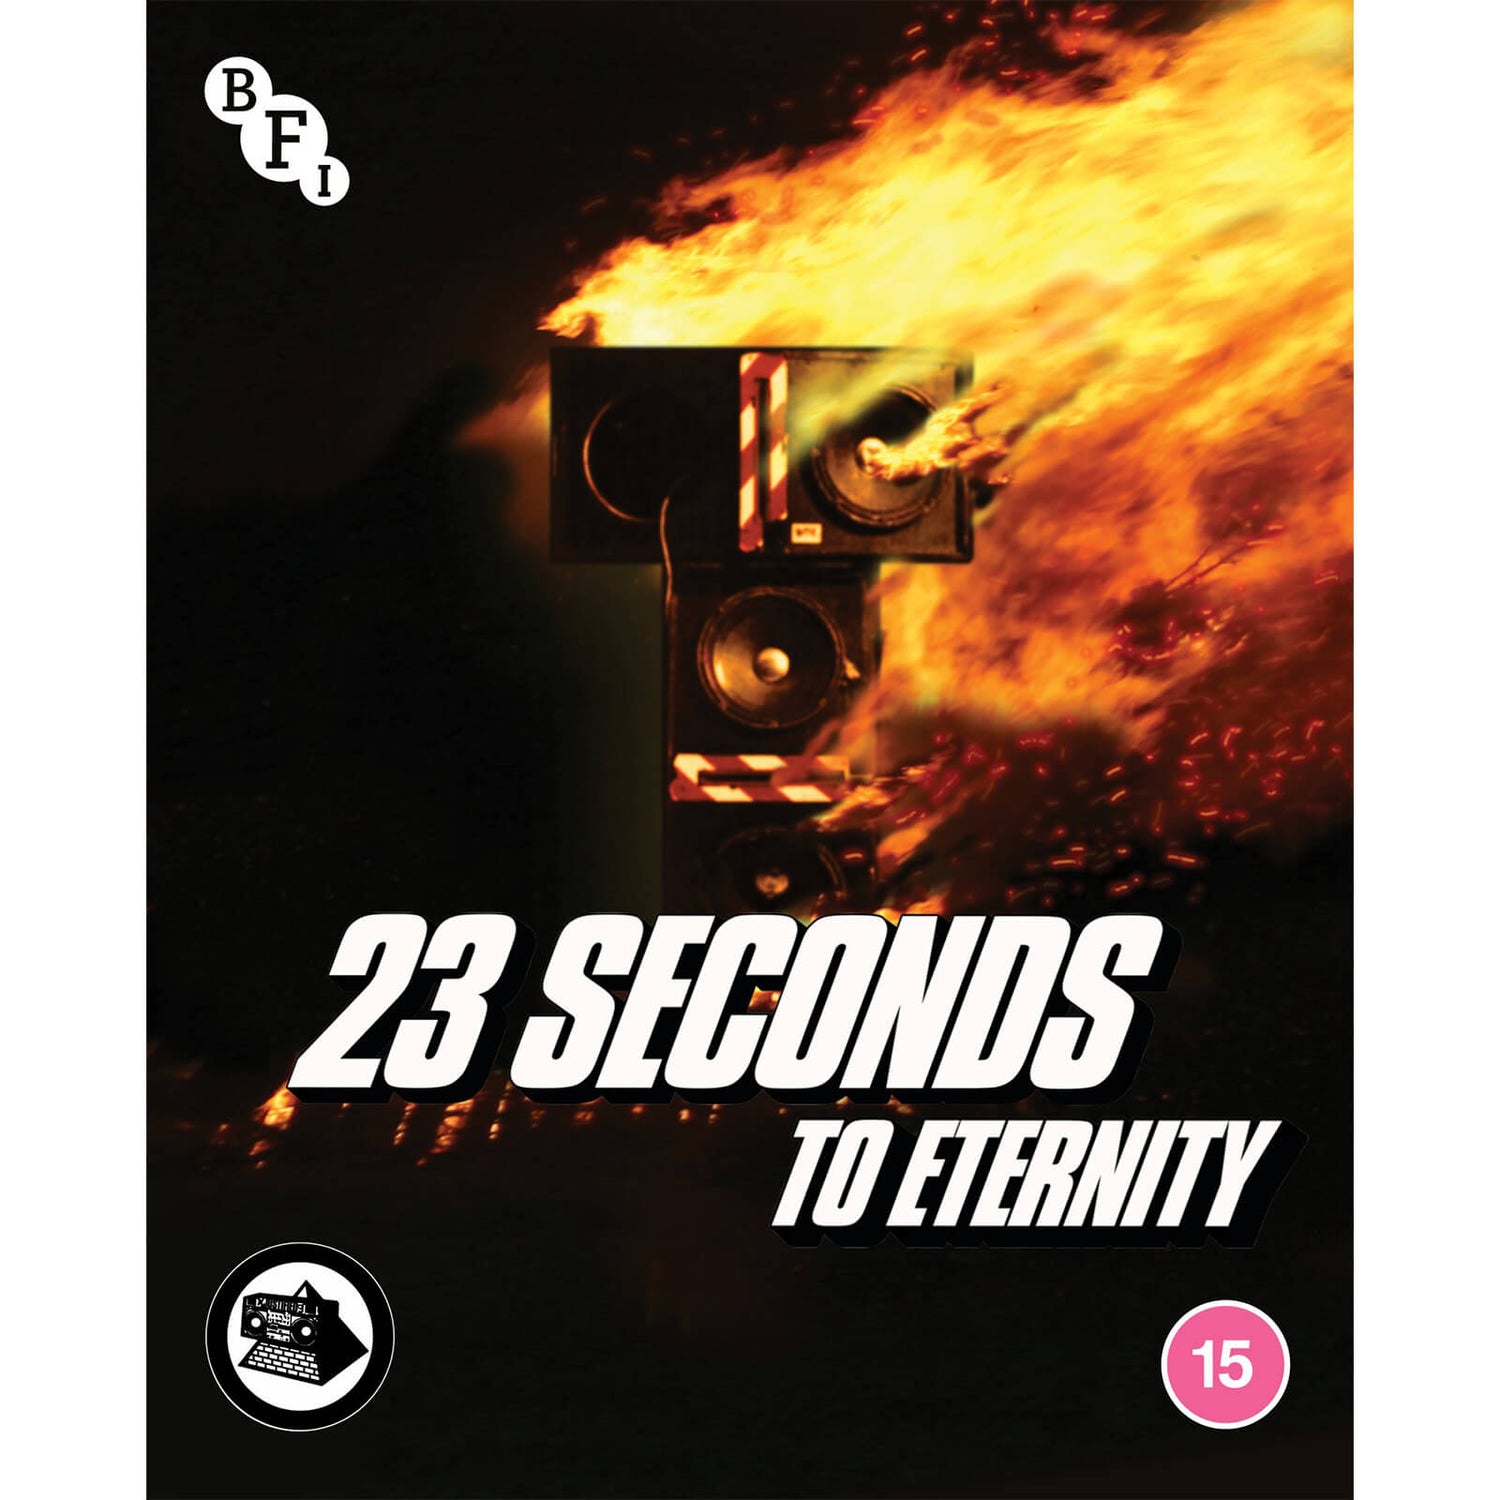 The KLF: 23 Seconds to Eternity (Dual Format Edition)